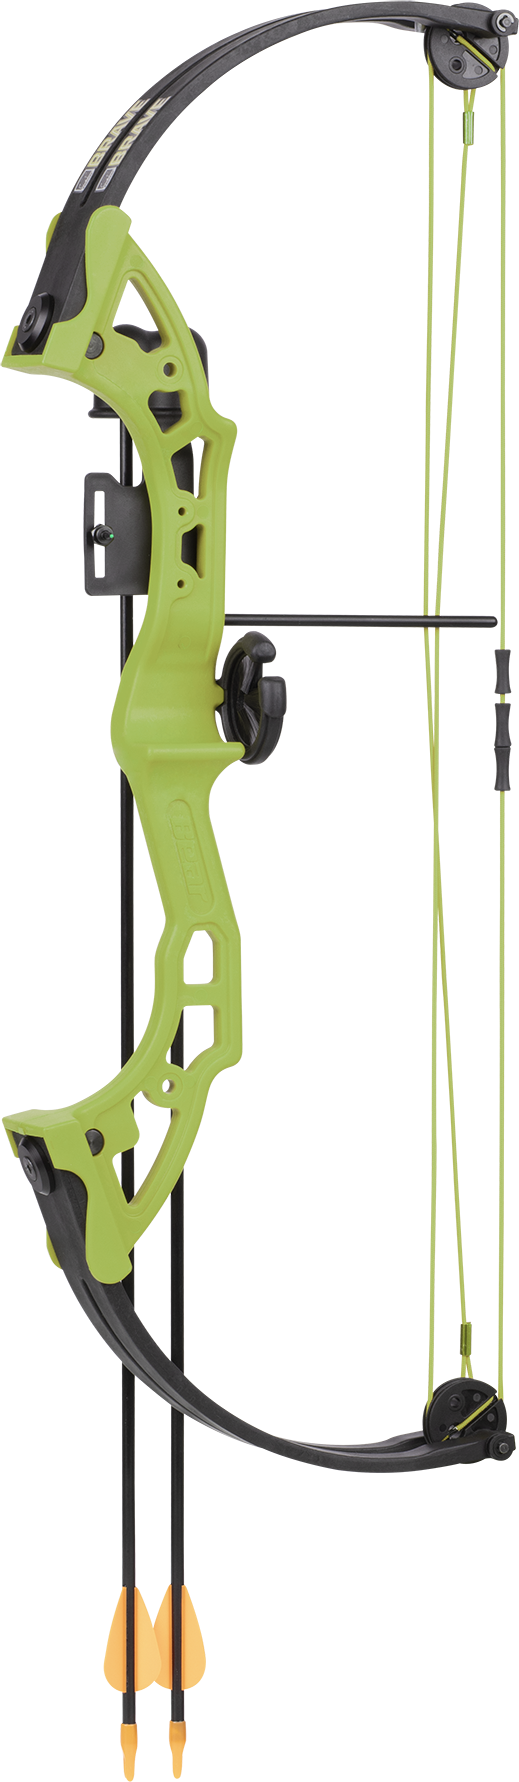 Bear Brave Bow with Biscuit - Green Youth Compound Bow - Youth_1